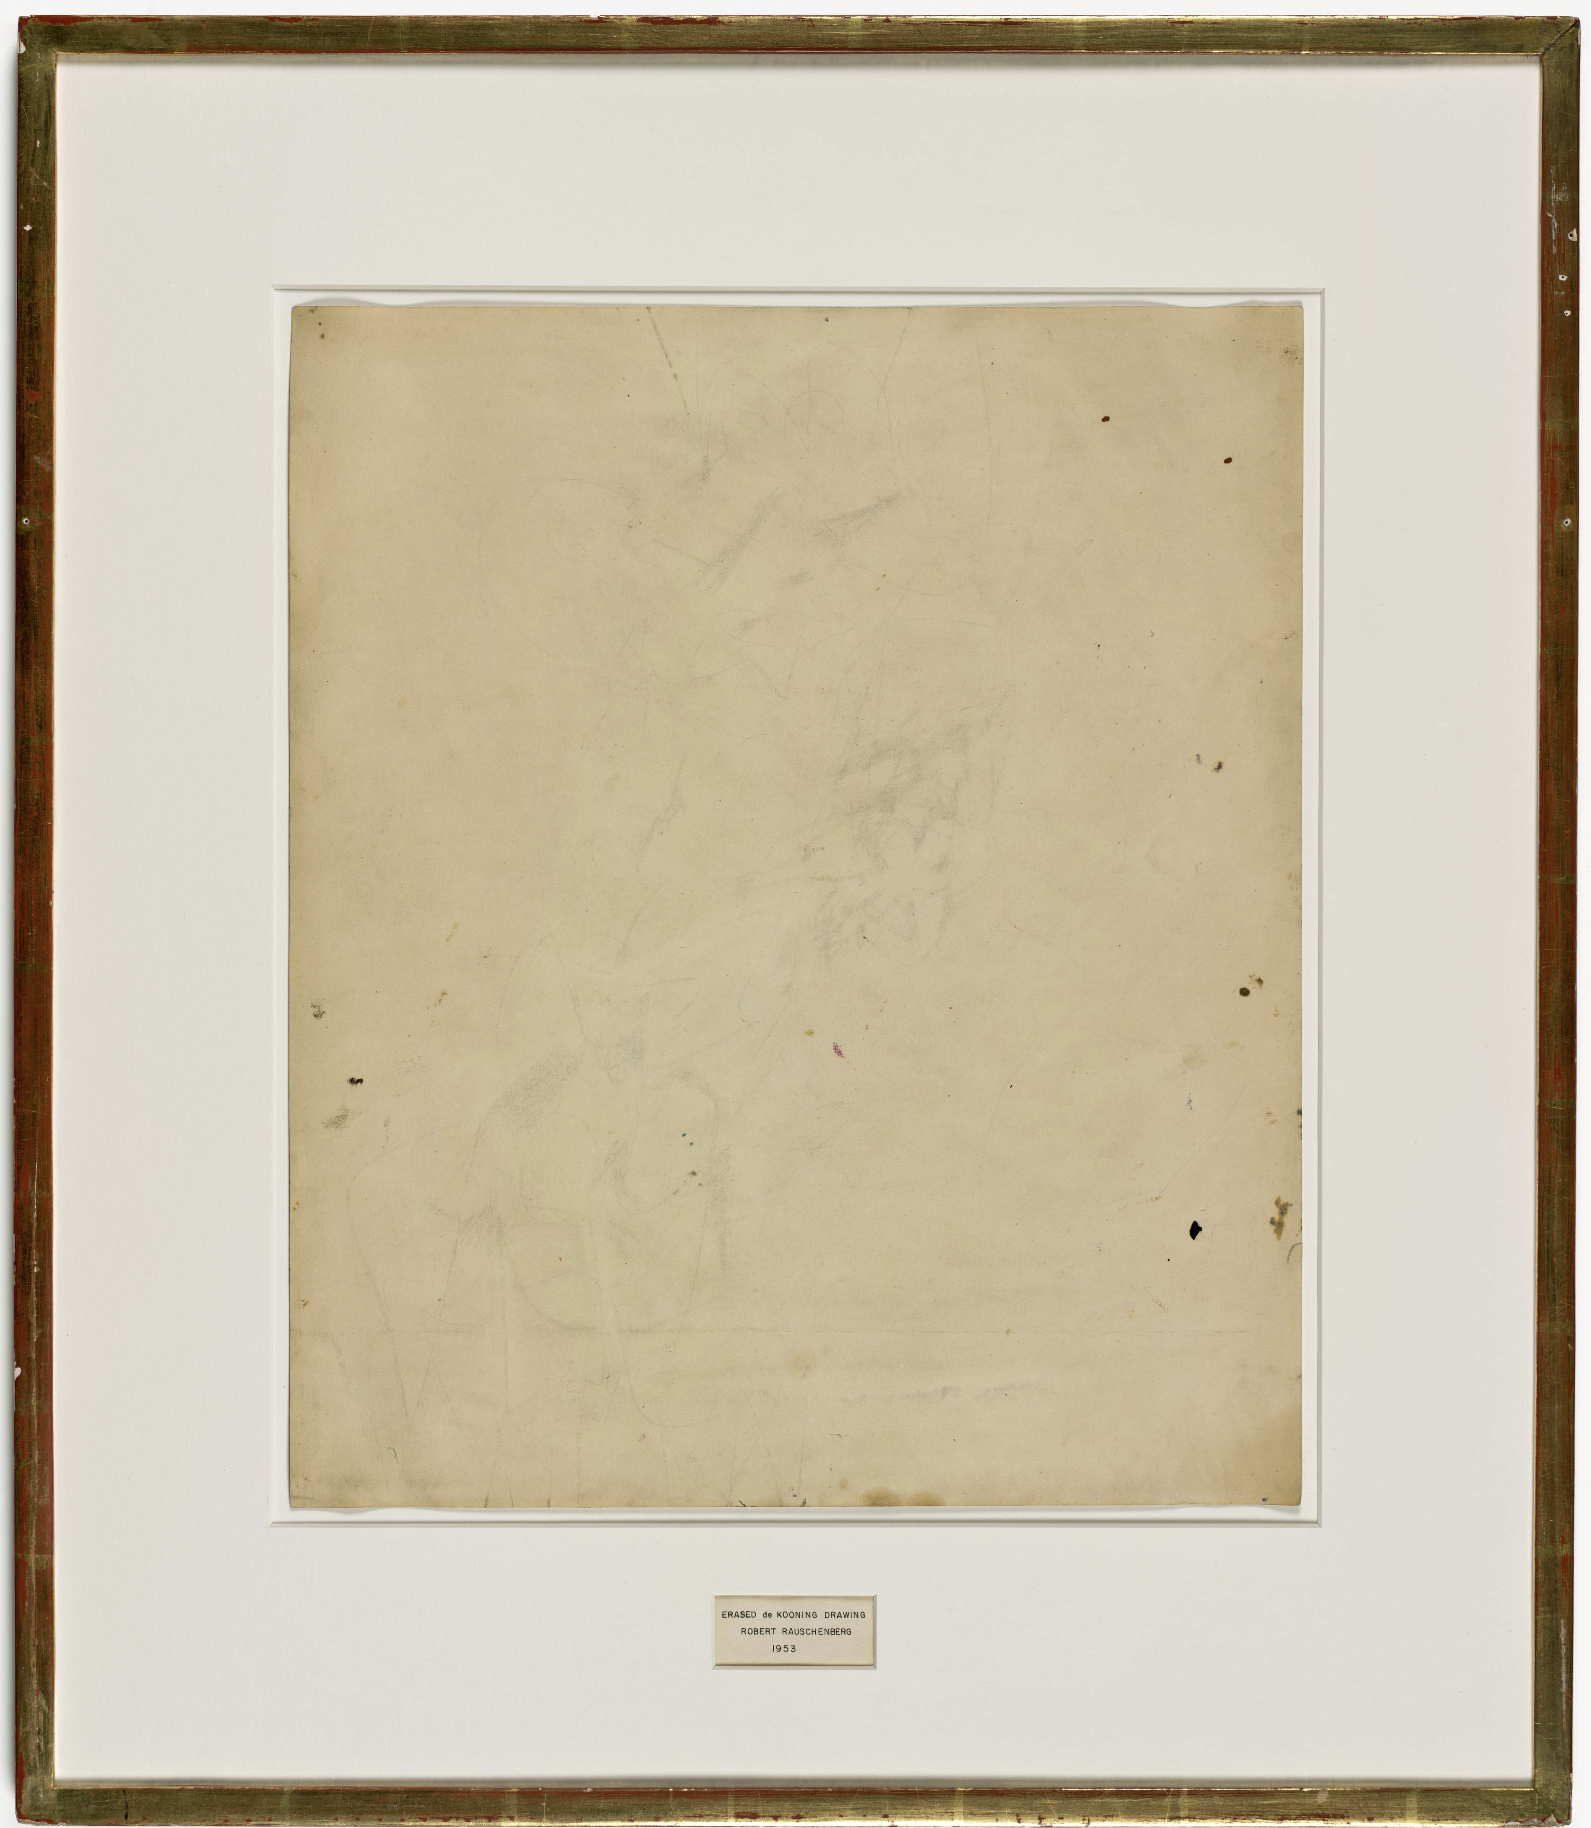 Robert Rauschenberg, Erased de Kooning Drawing, 1953, traces of drawing media on paper with label and gilded frame, 25 1/4 in. x 21 3/4 in. (64.14 cm x 55.25 cm) (© Robert Rauschenberg Foundation, image: SFMOMA) 